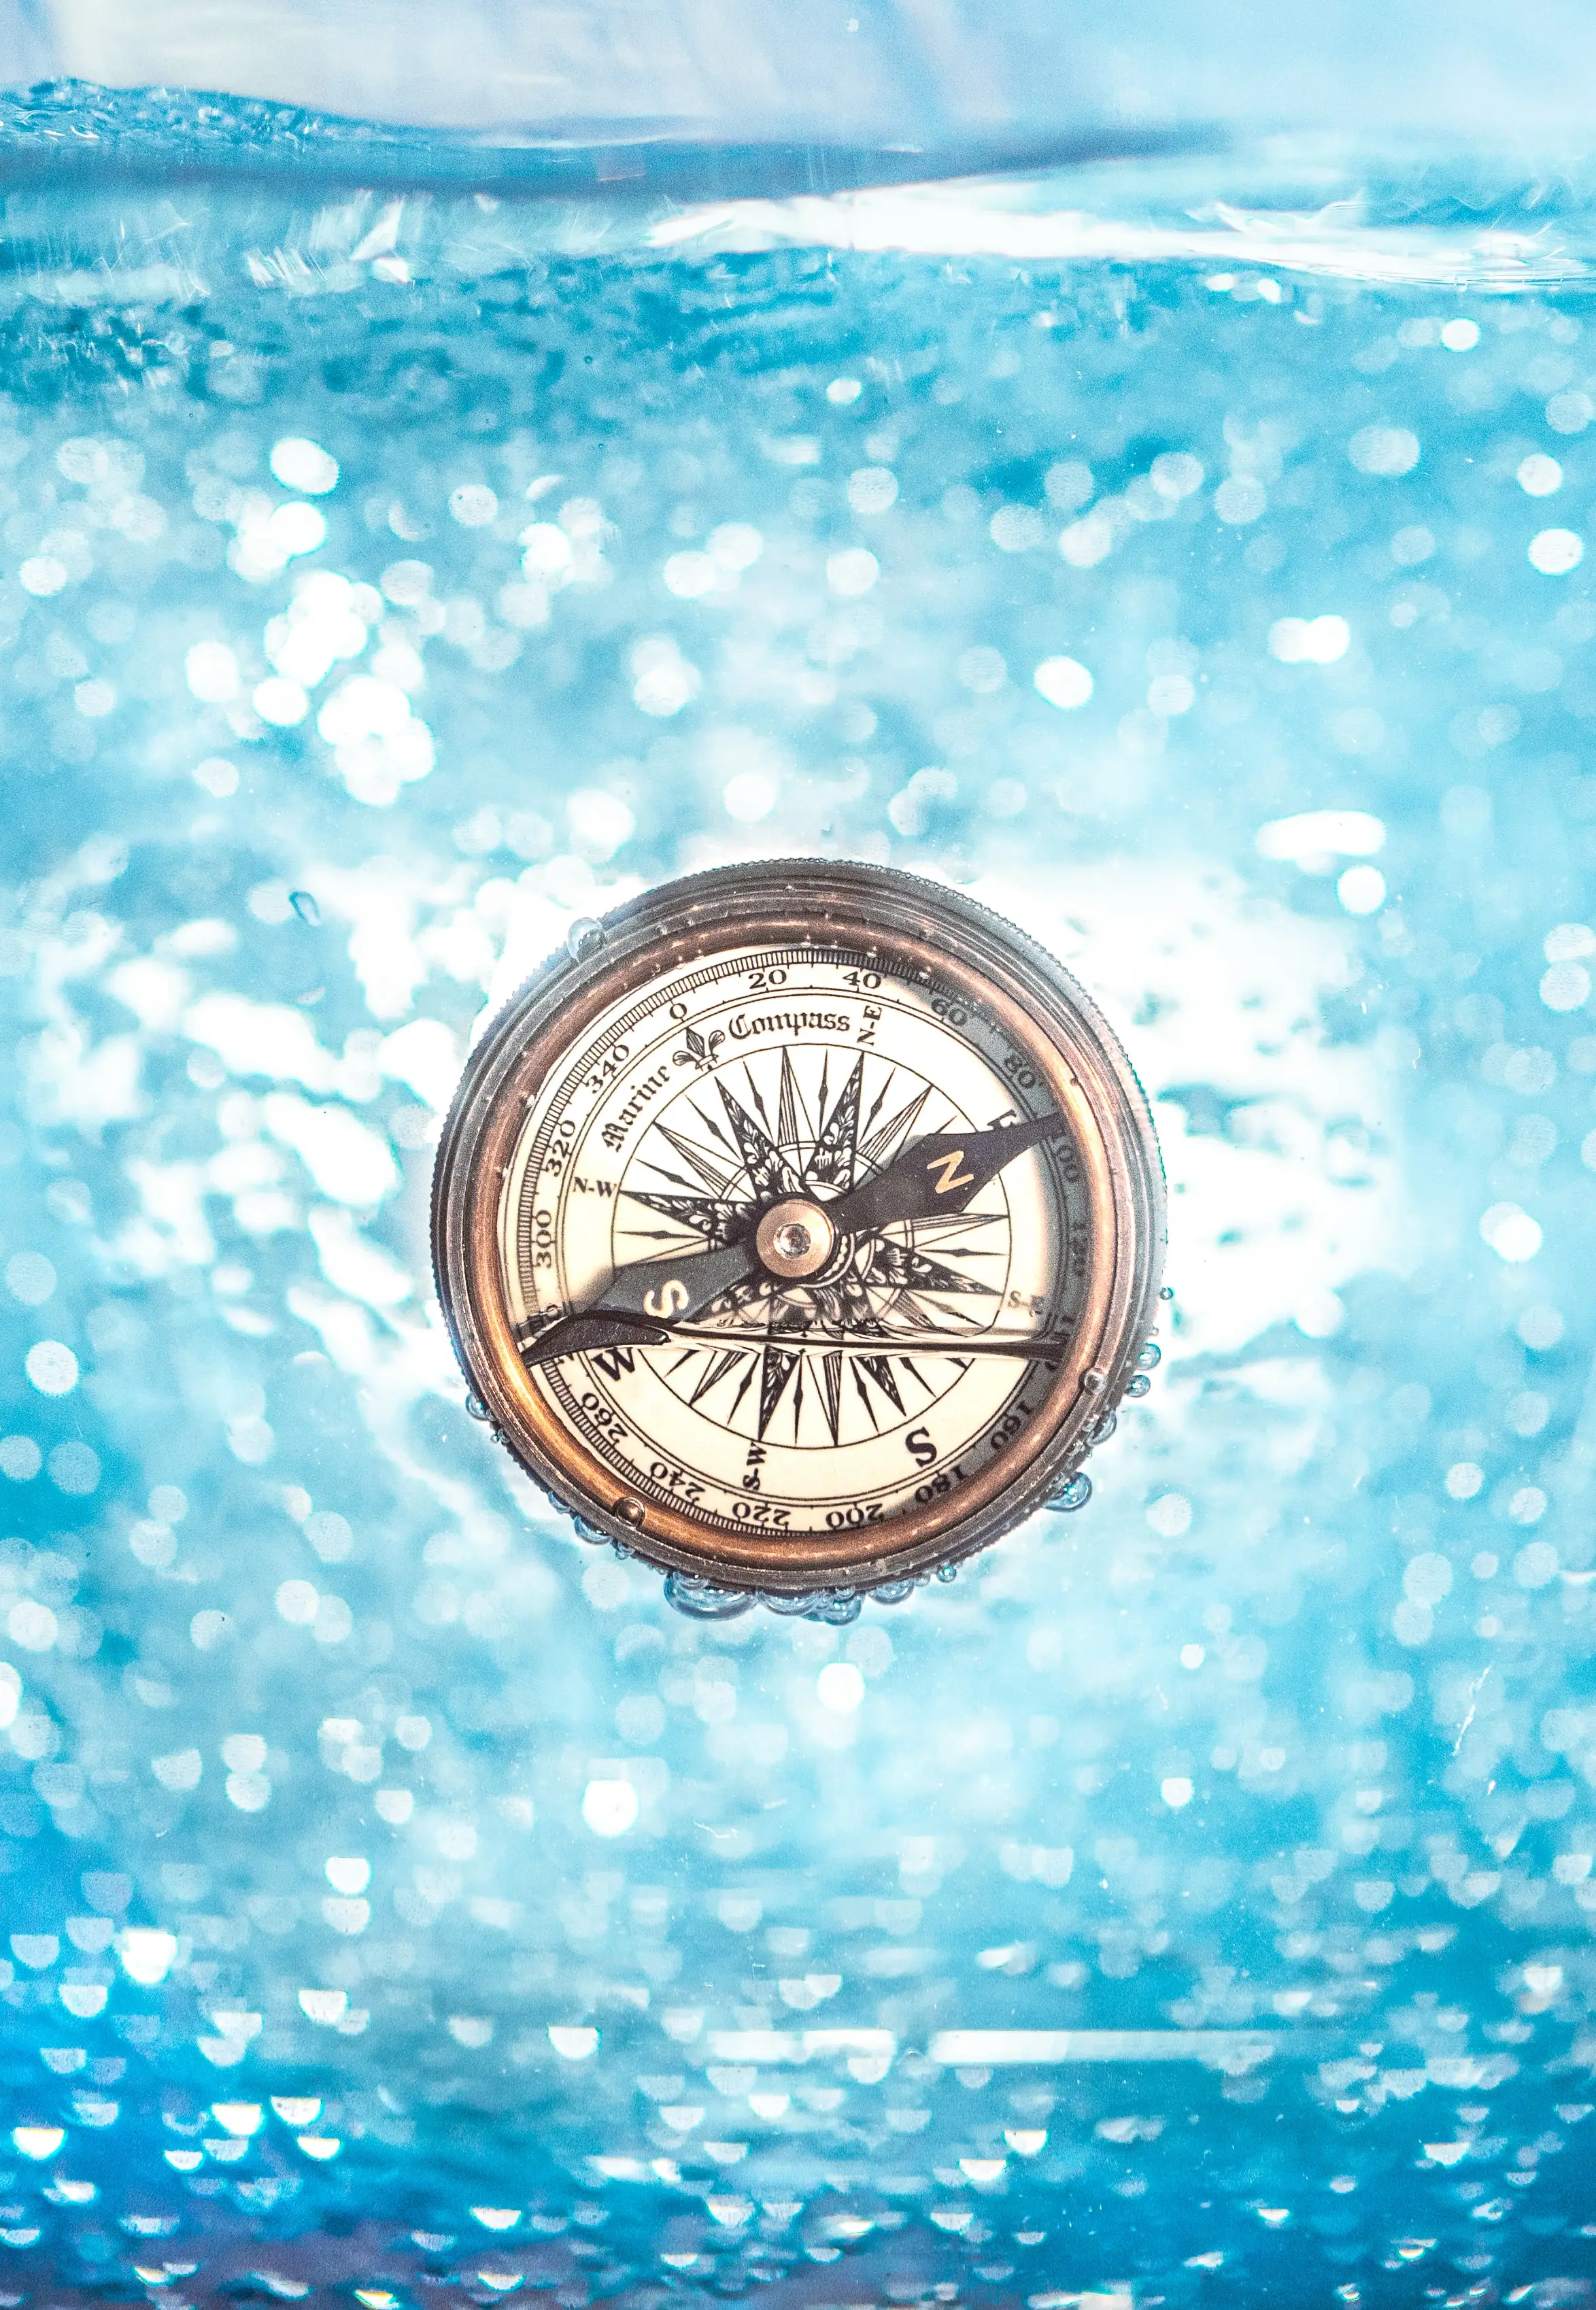 Old fashion compass (antique looking), on a blue watery background.